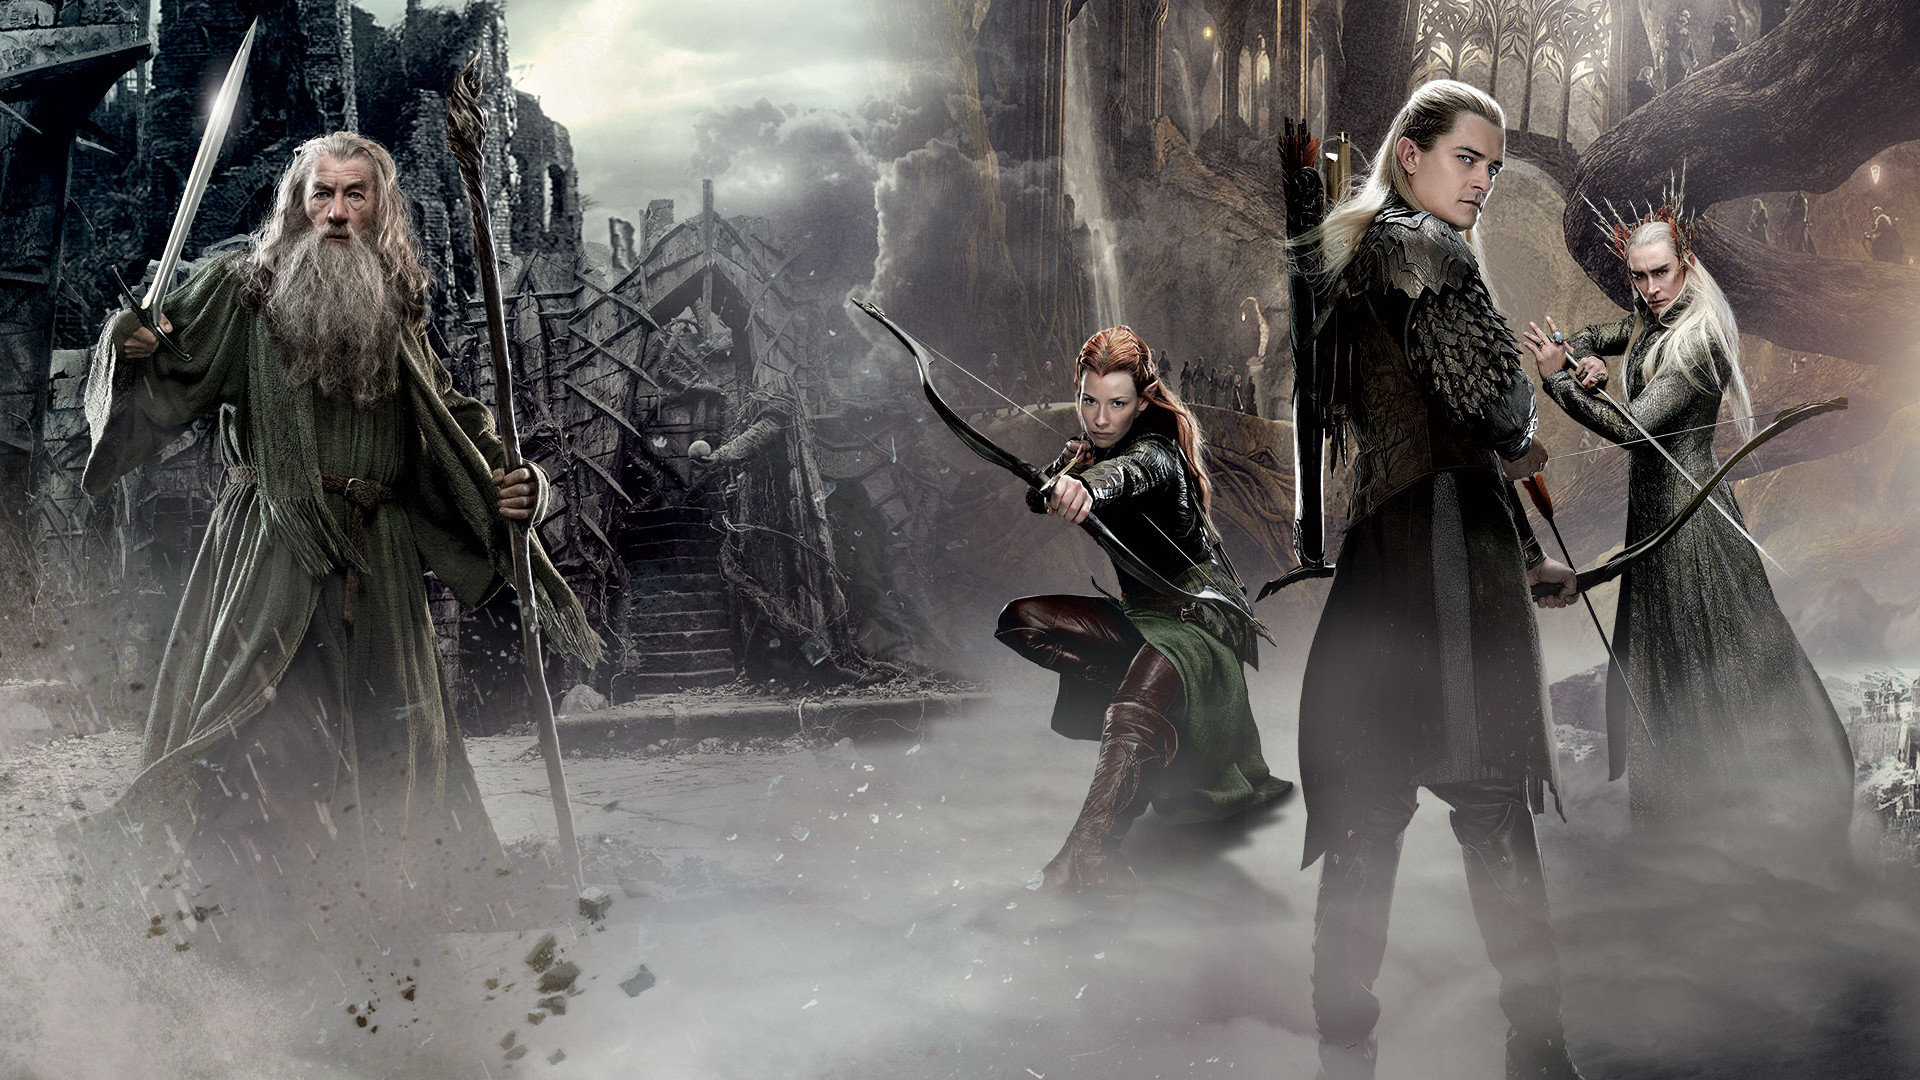 High resolution The Hobbit: The Desolation Of Smaug full hd 1920x1080 wallpaper ID:397833 for desktop